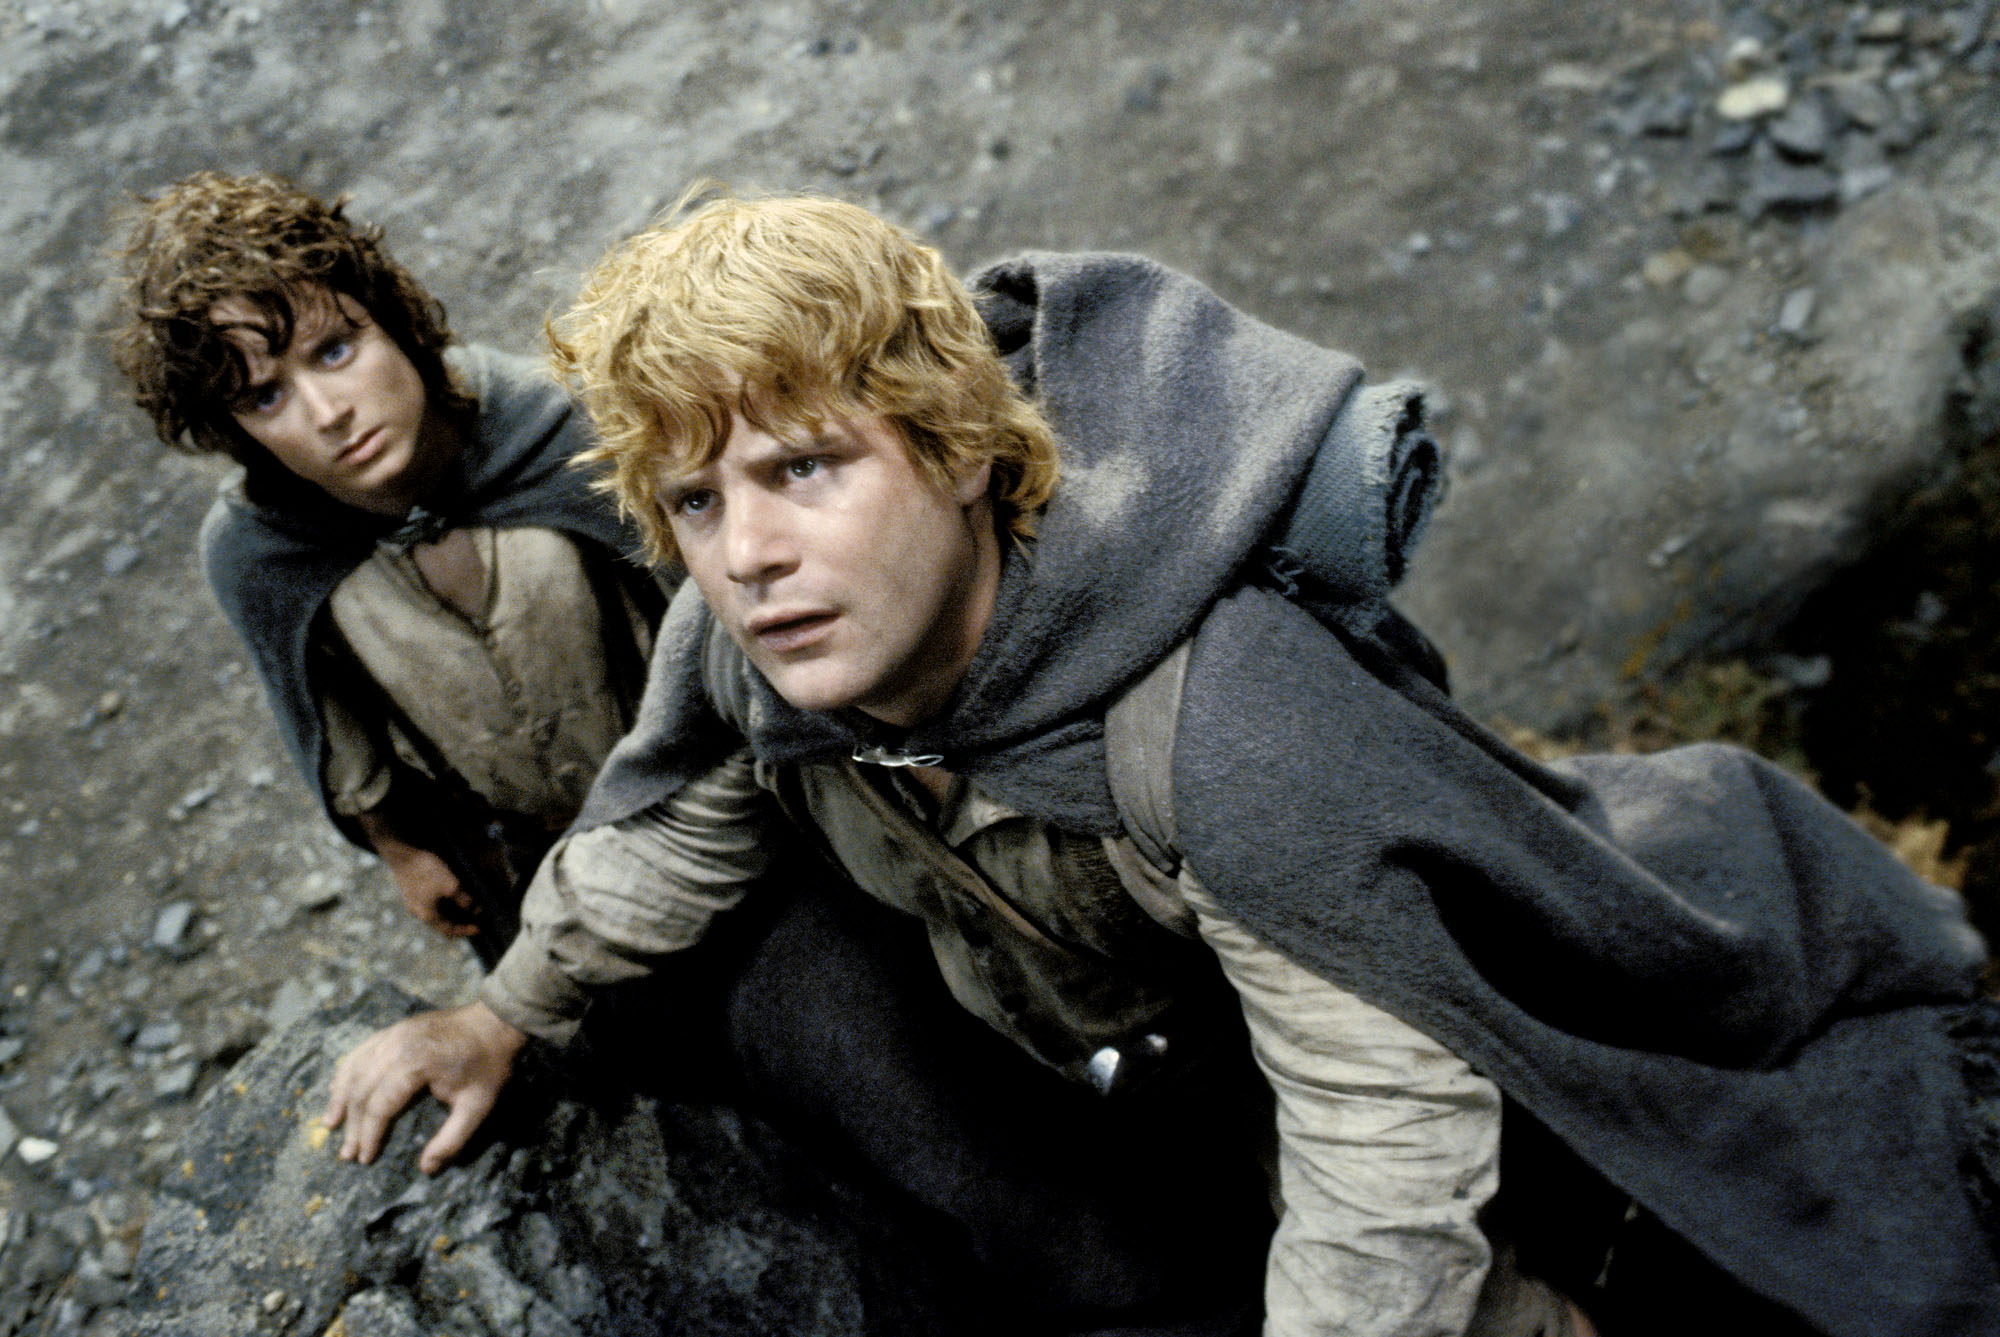 moves Production to UK for Season 2 of Lord of the Rings TV series